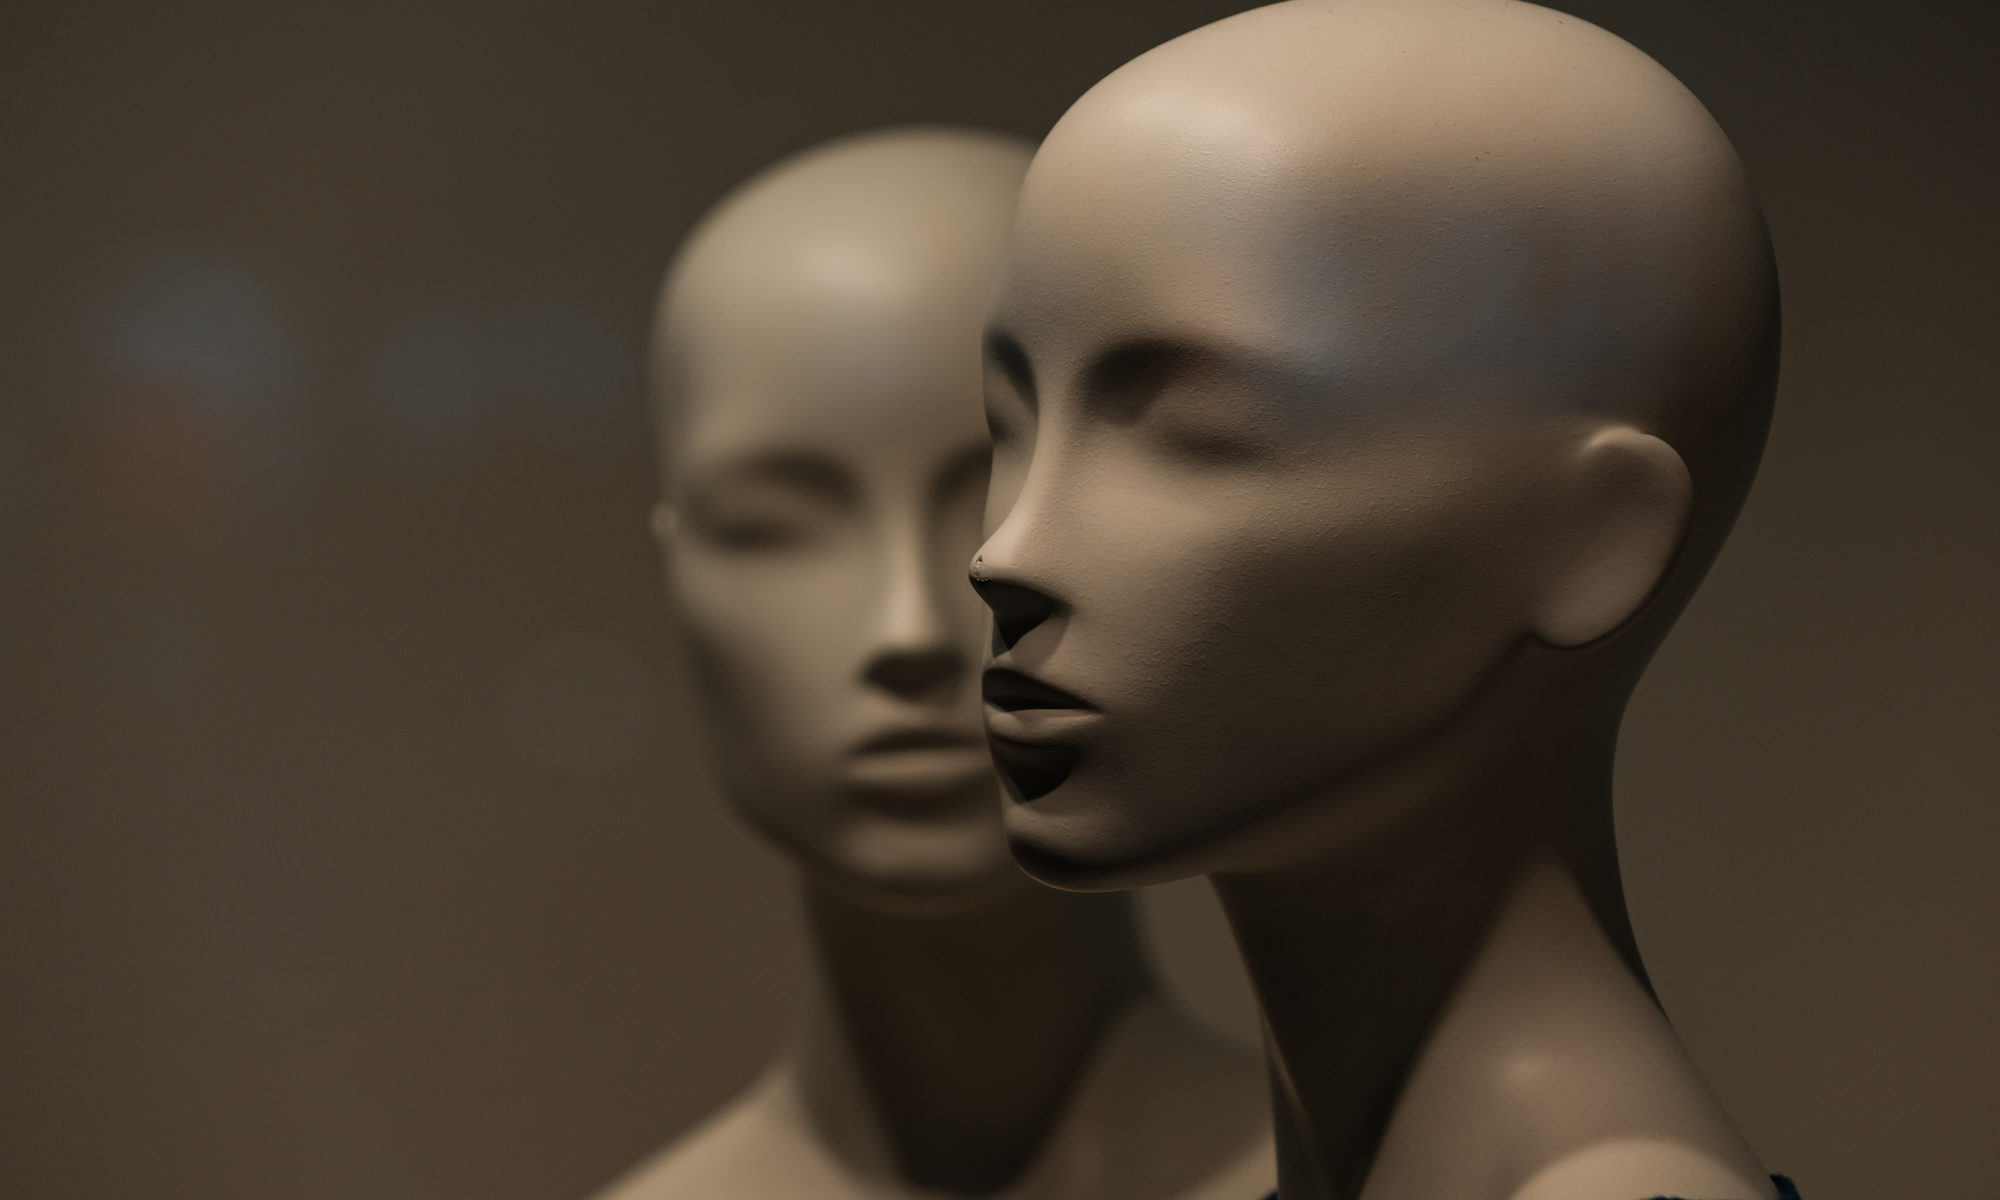 photograph of mannequin faces